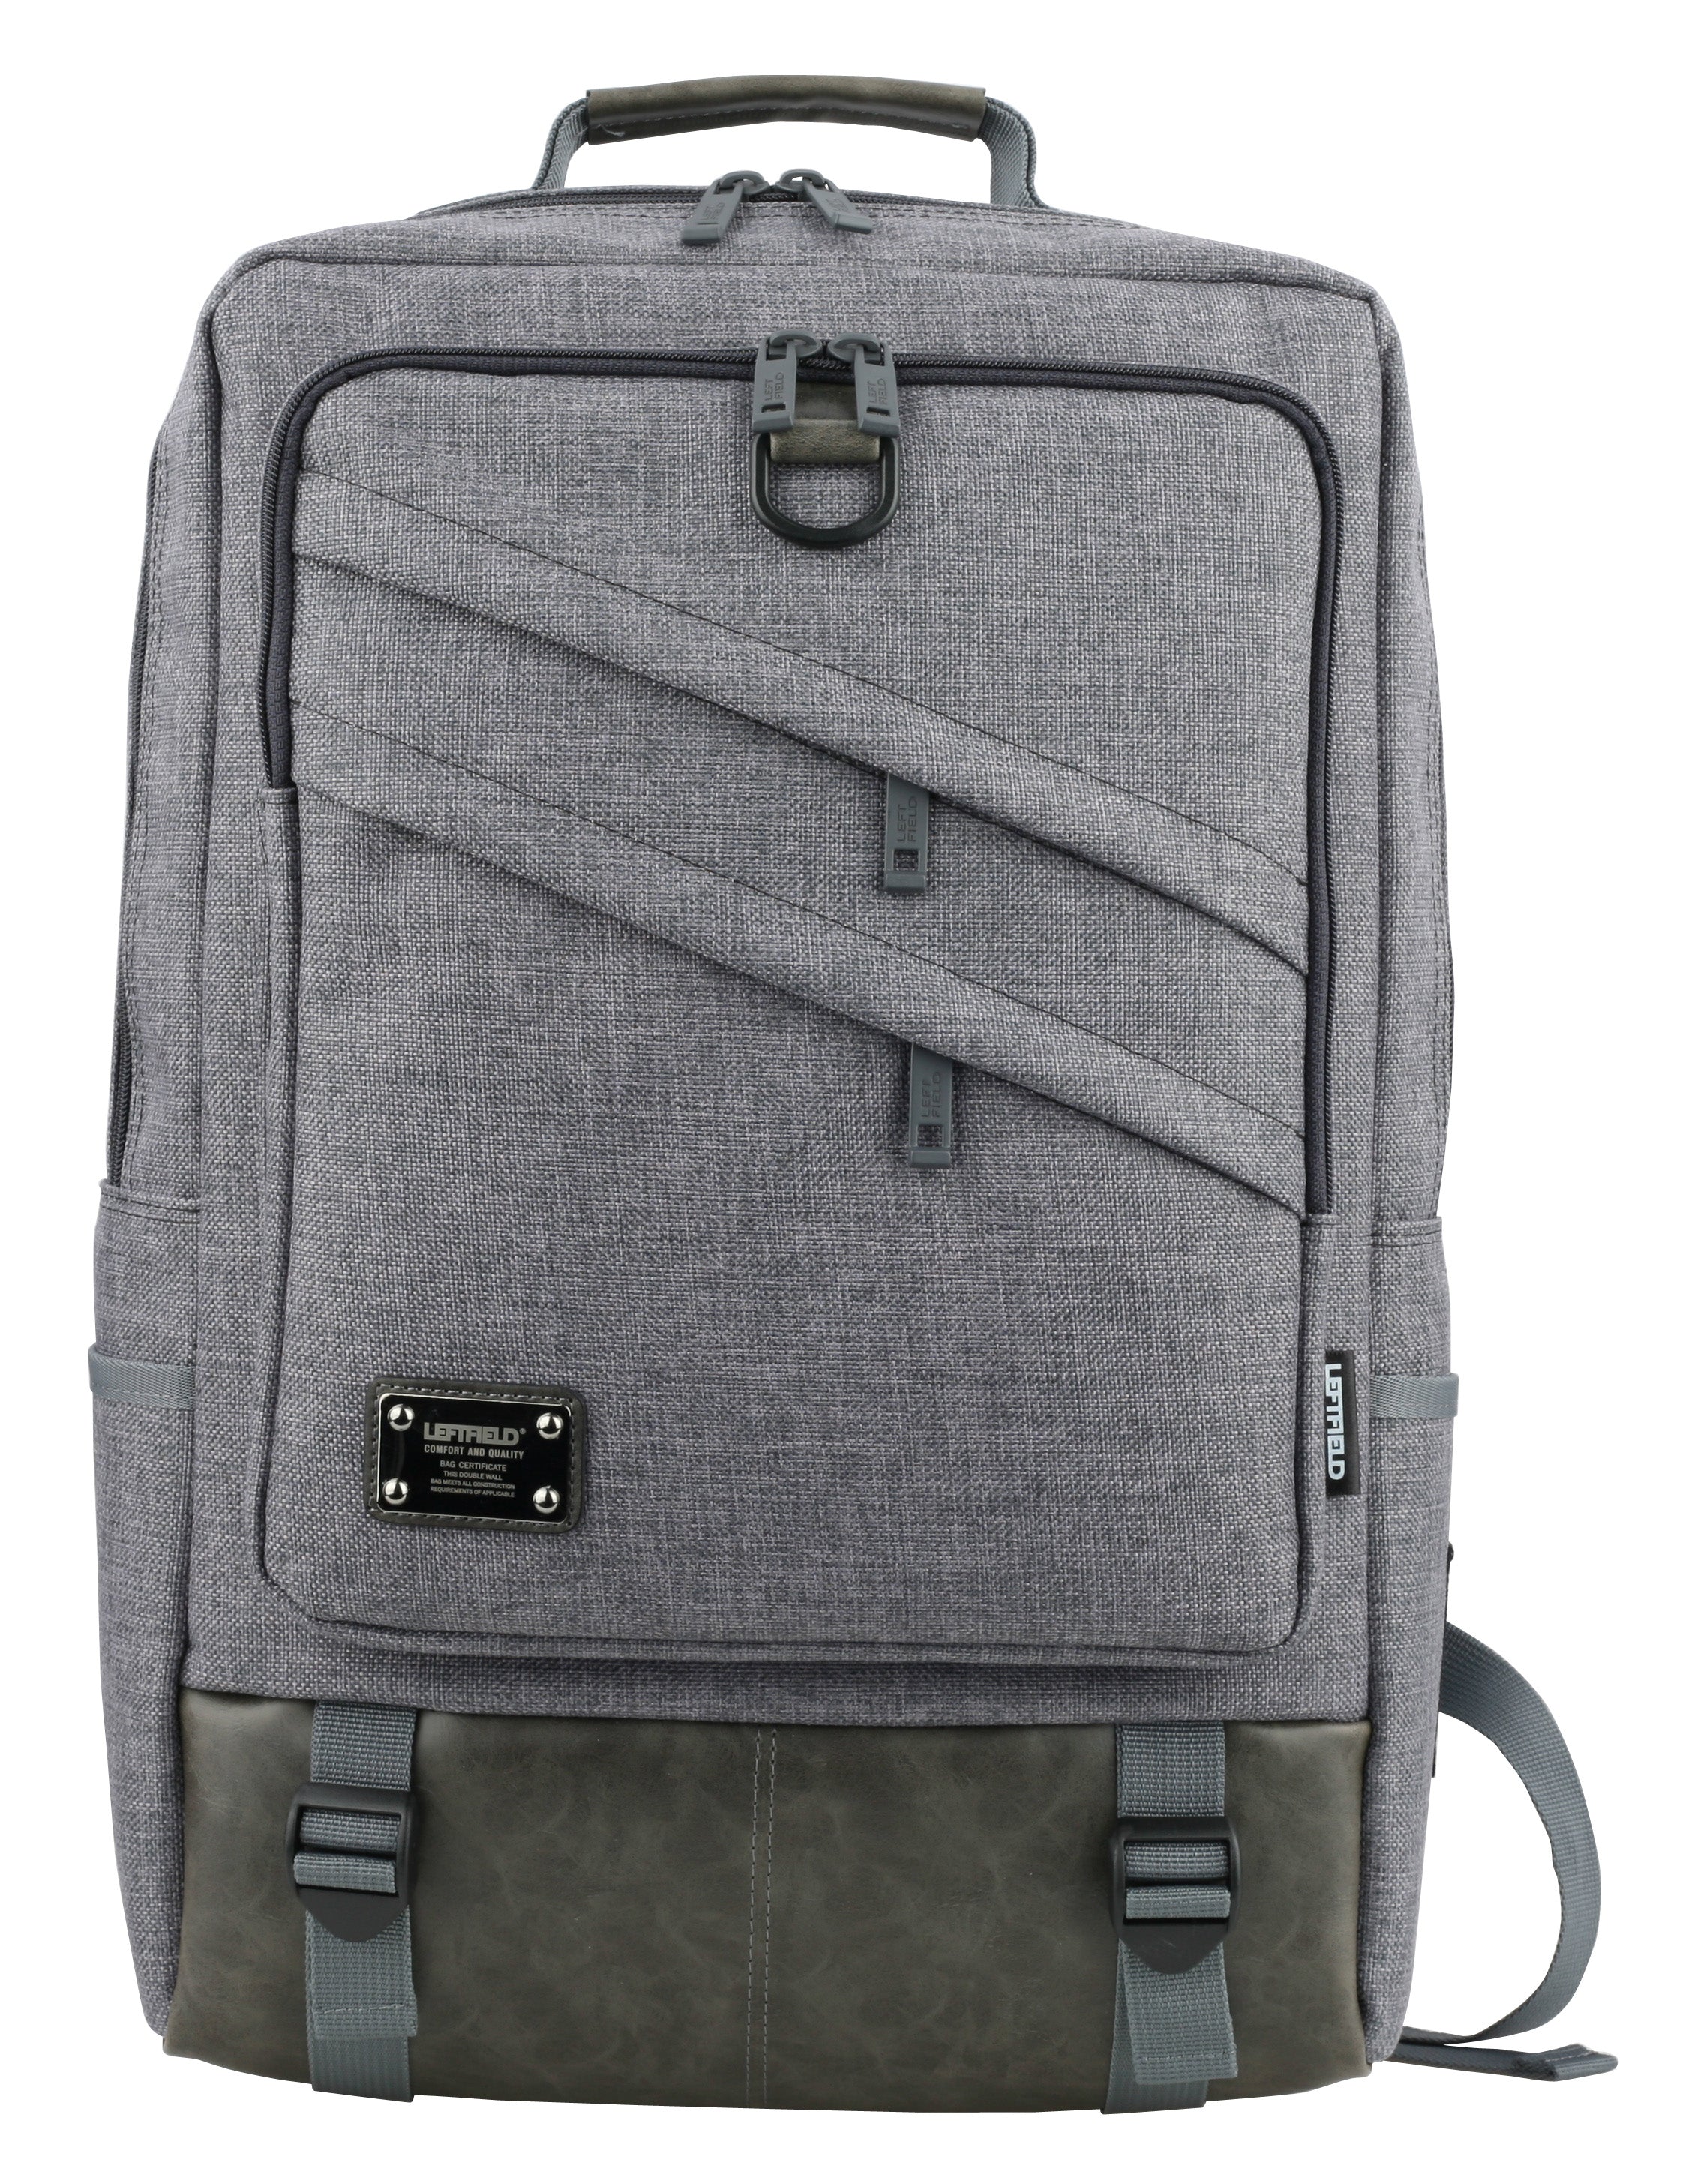 Gray Large Canvas Casual Backpacks Daypack